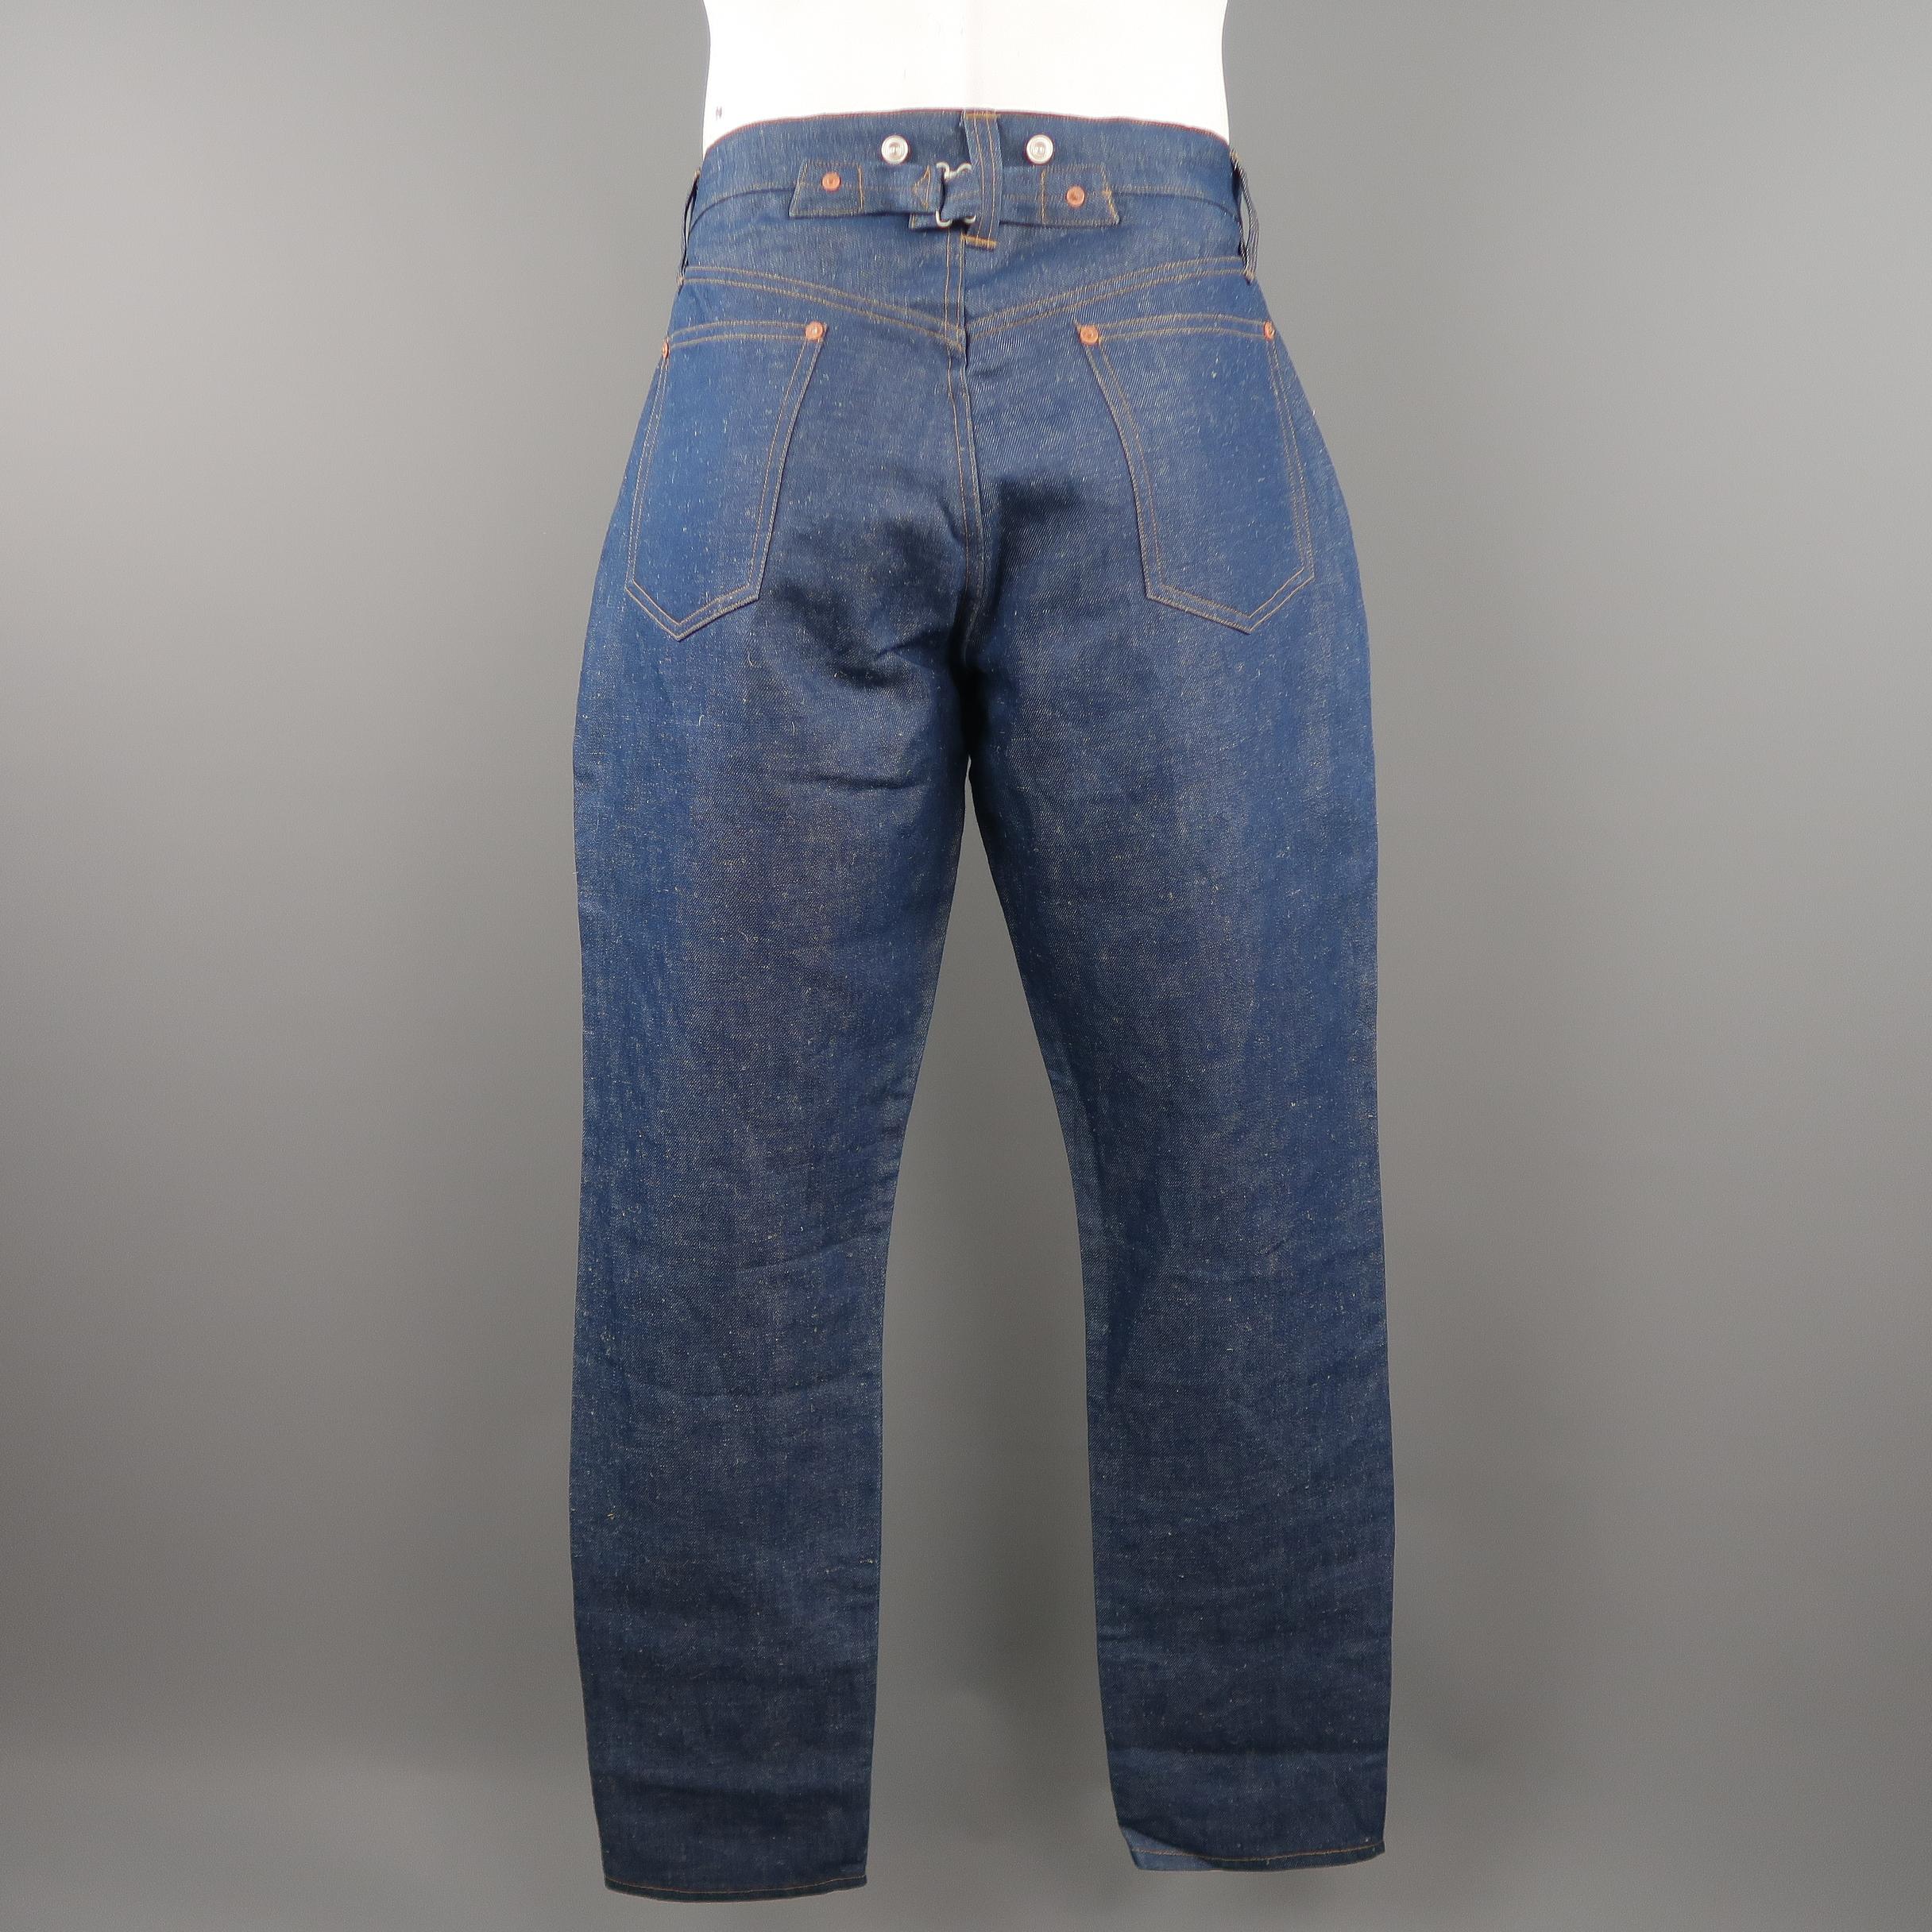 HAVERSACK jeans come in a textured cotton linen blend denim with a classic 5 pocket cut, button fly, and braces buttons. Made in Japan.
 
New with Tags.
Marked: M
 
Measurements:
 
Waist: 32 in.
Rise: 12.5 in.
Inseam:  31 in.